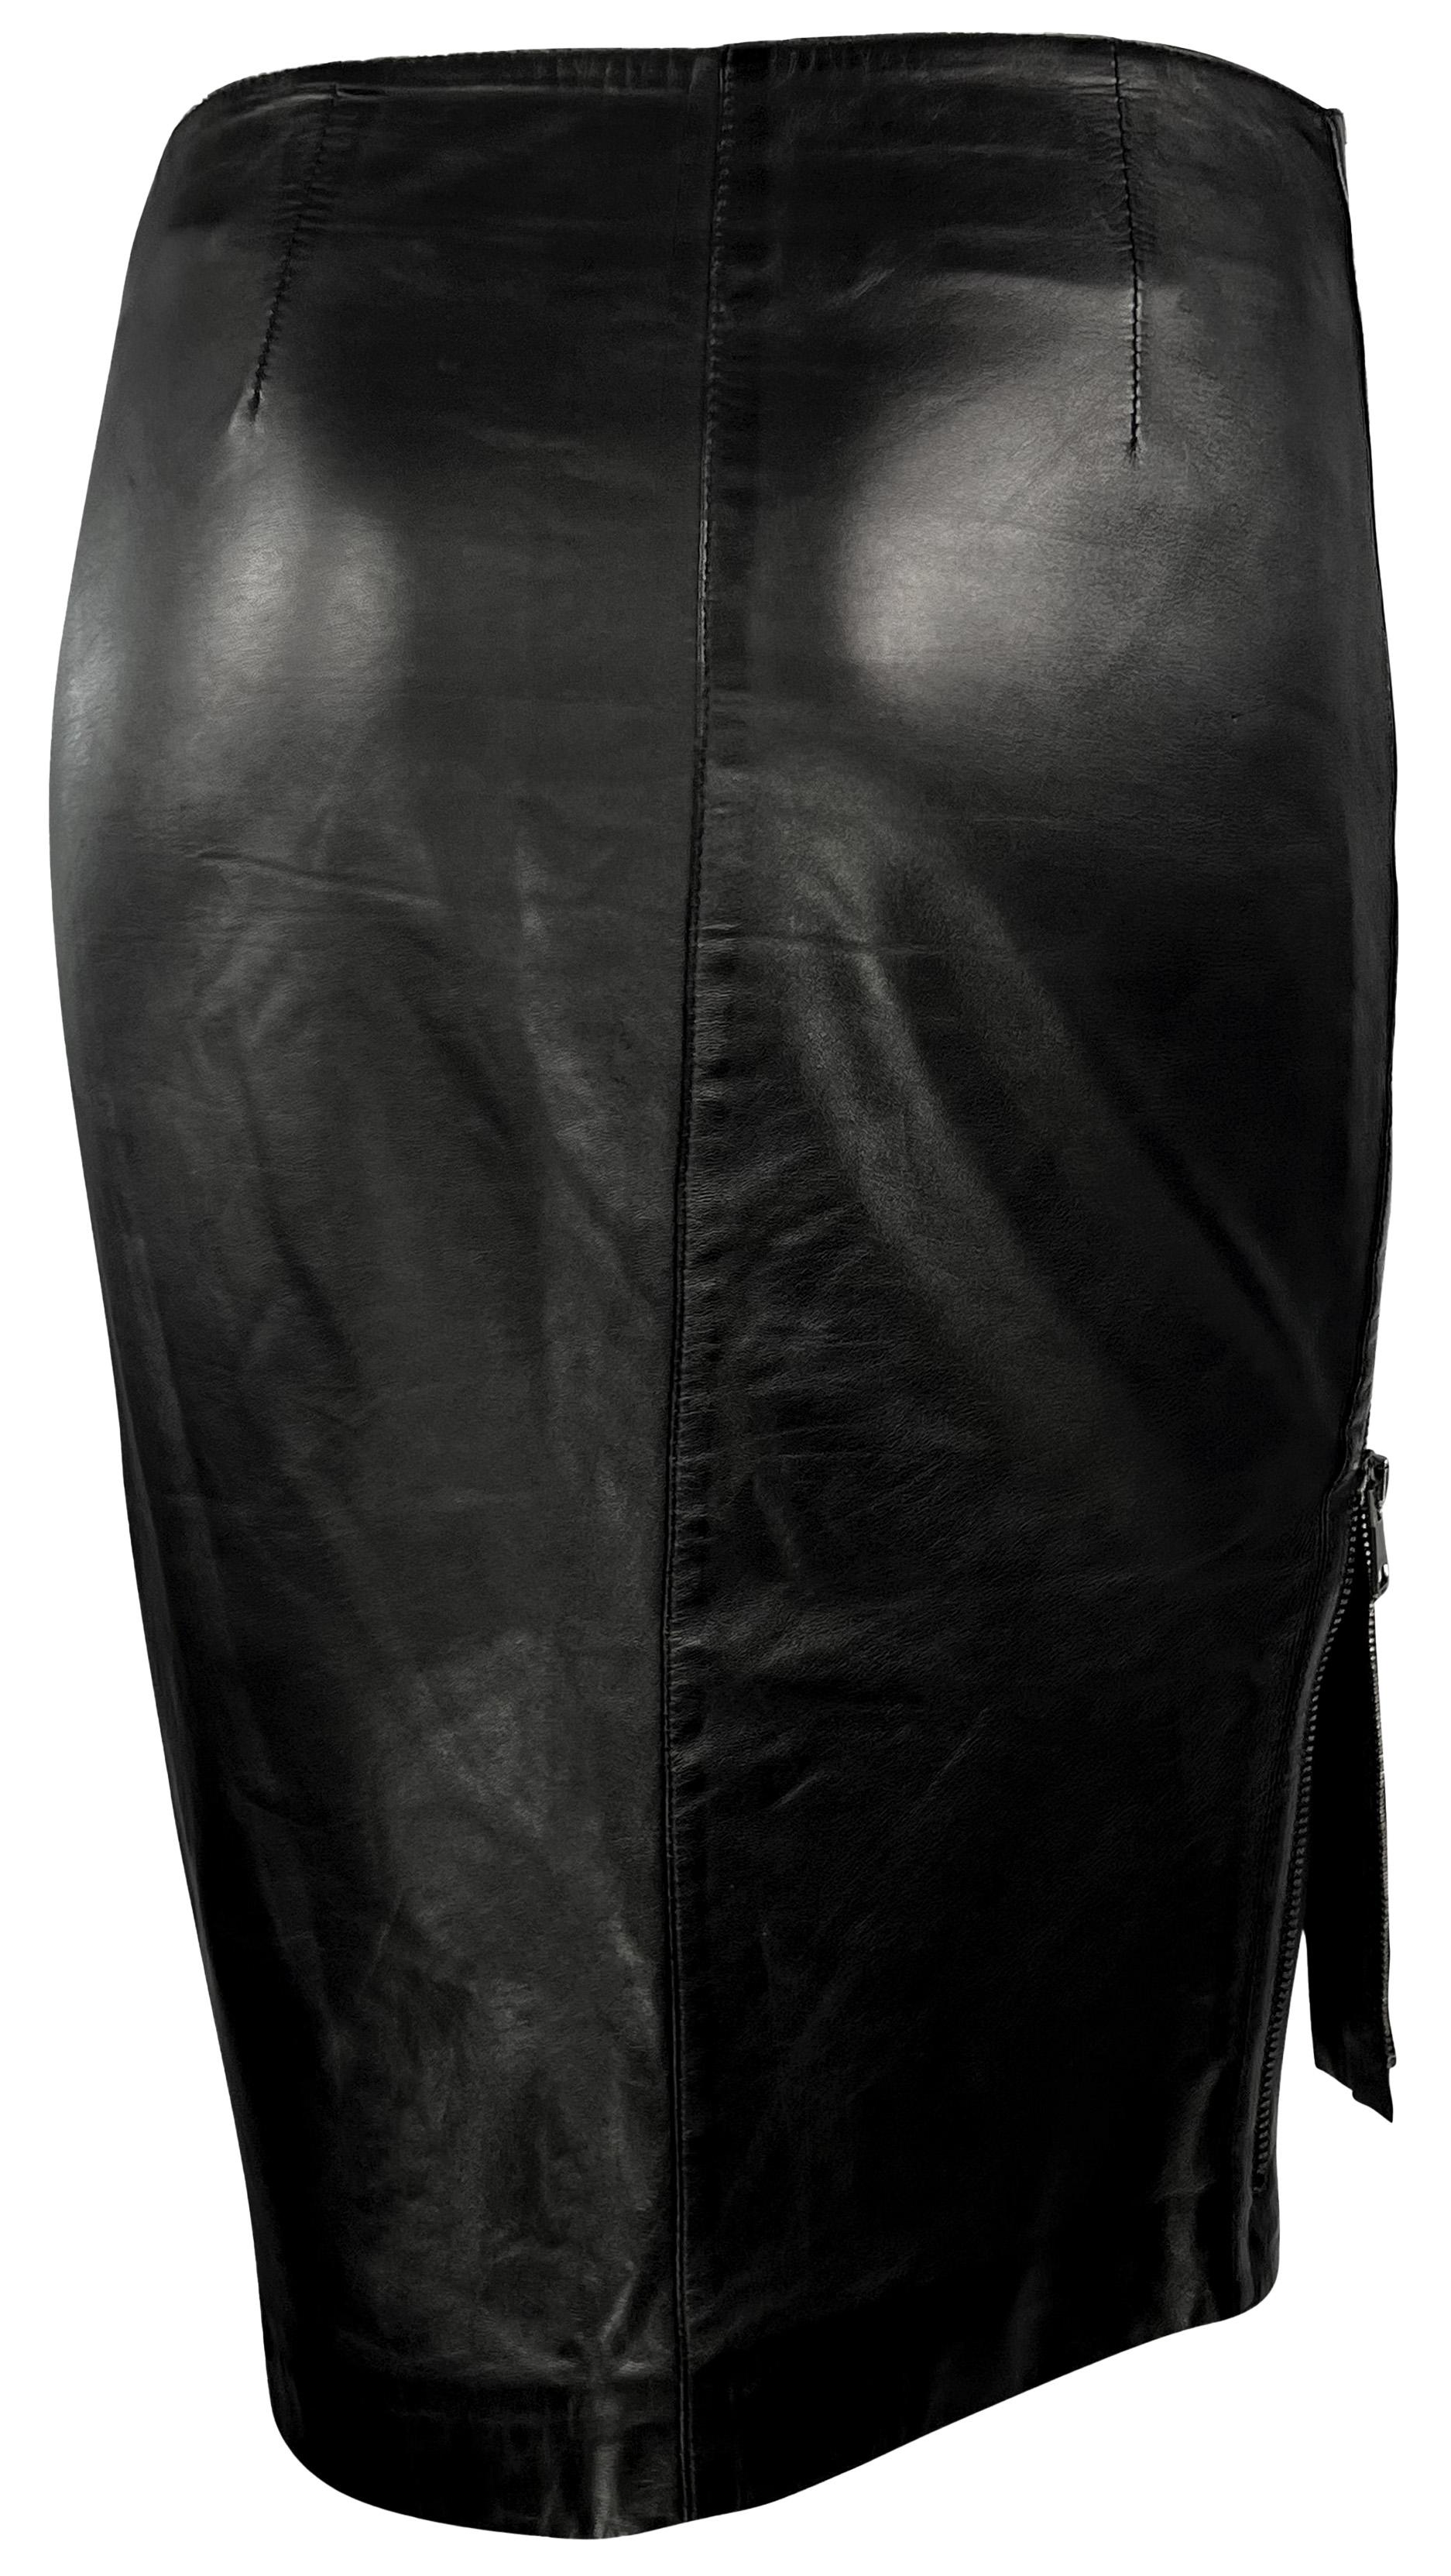 F/W 2001 Gucci by Tom Ford Black Leather Logo Zip Adjustable Pencil Skirt In Good Condition For Sale In West Hollywood, CA